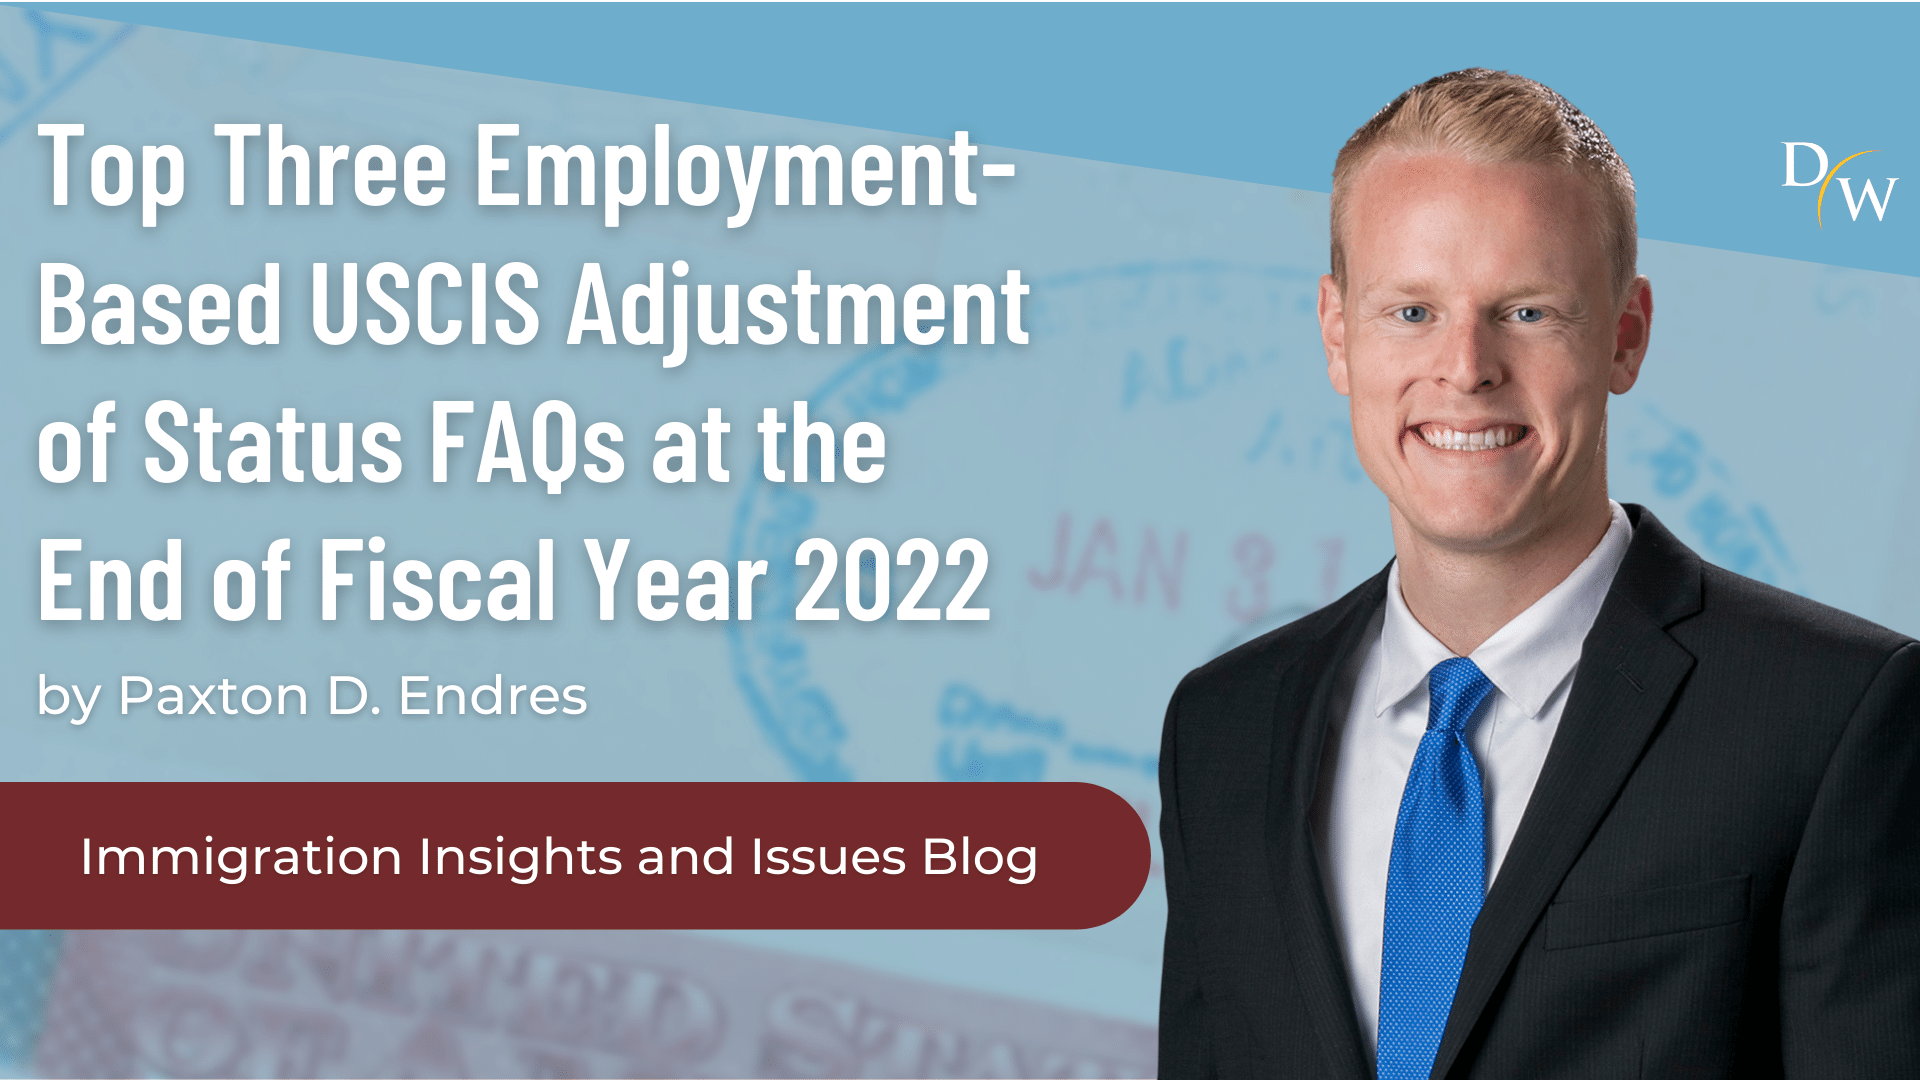 Top Three EmploymentBased USCIS Adjustment of Status FAQs at the End